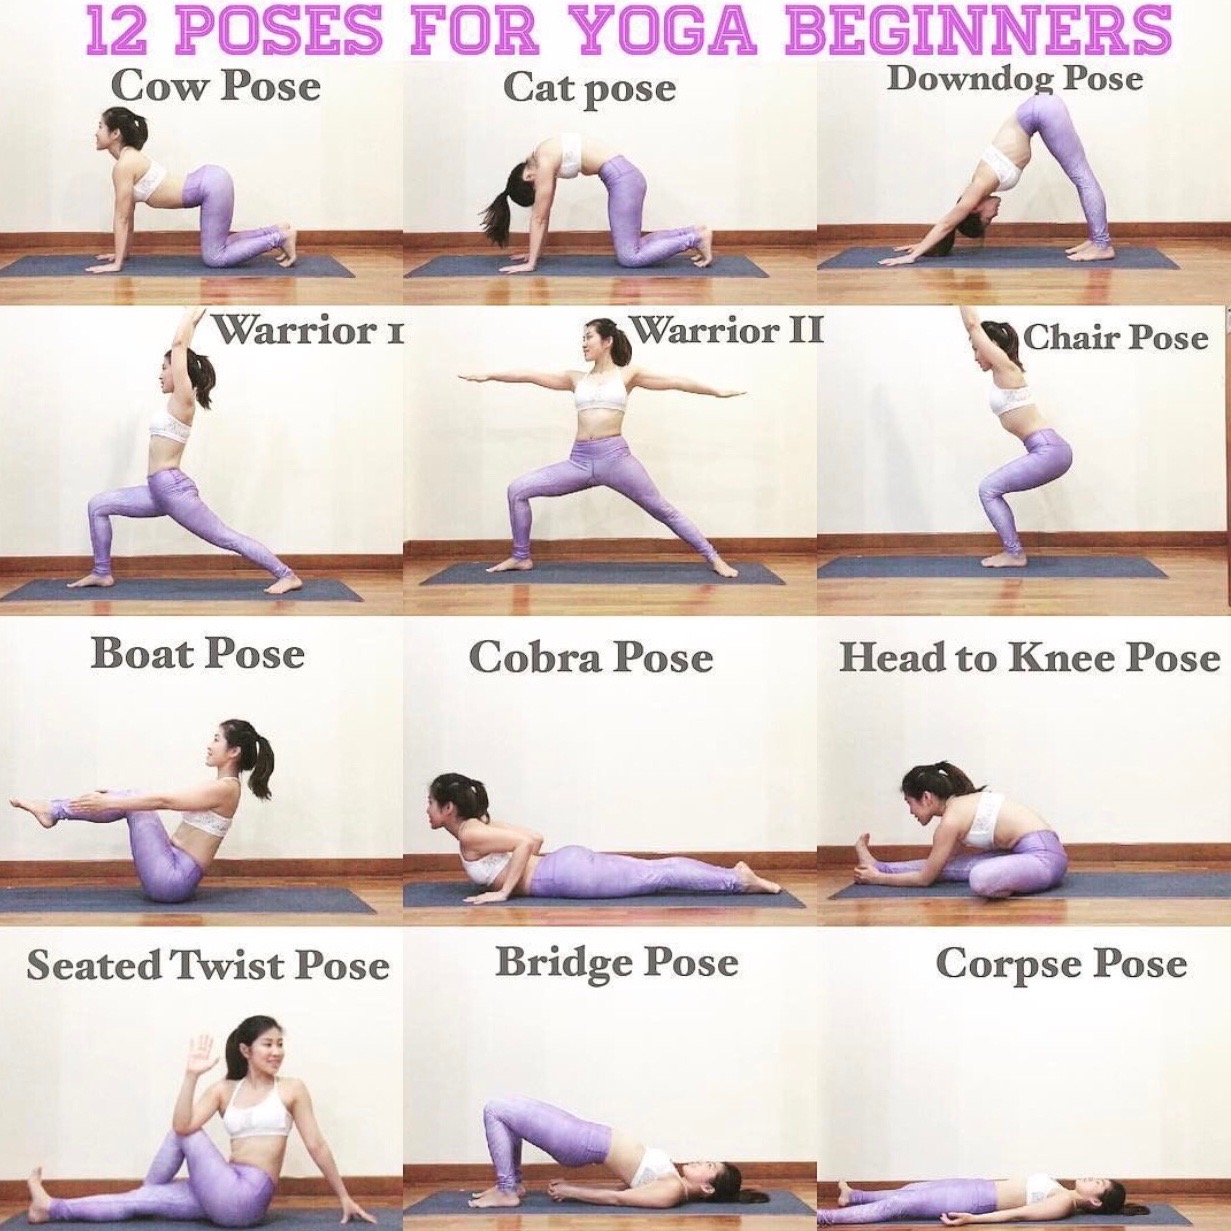 12 POSES FOR YOGA BEGINNERS — S3 YOGA